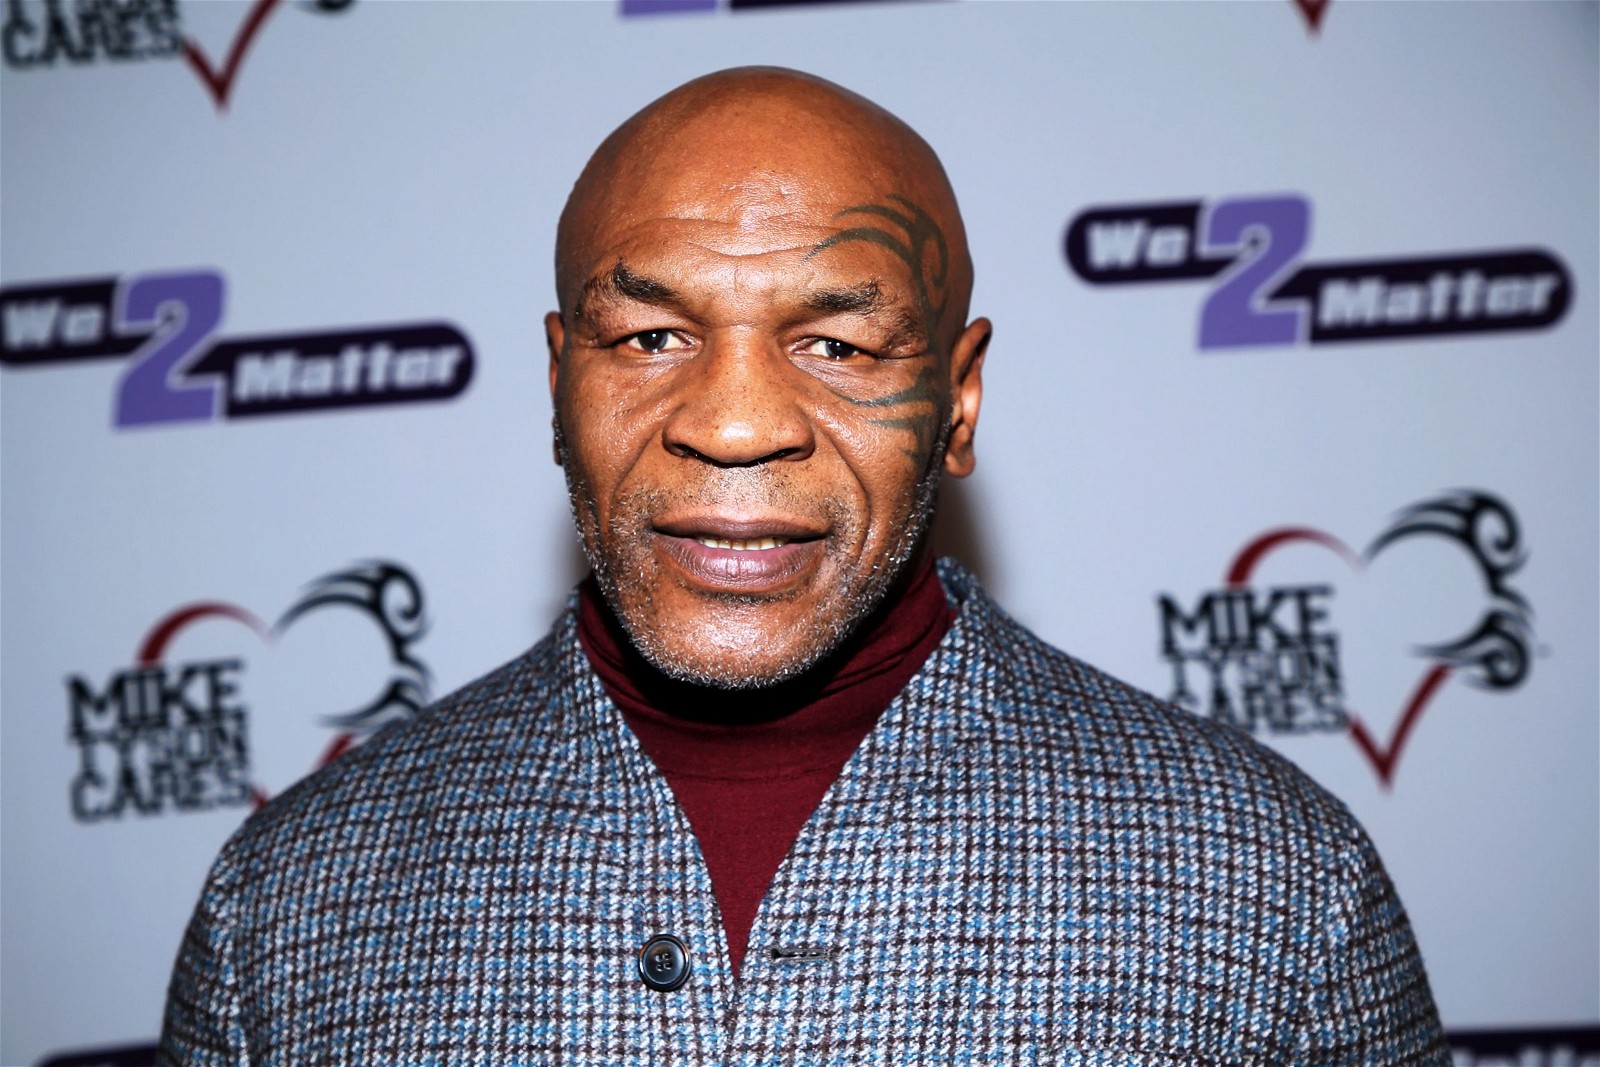 Mike Tyson at an event